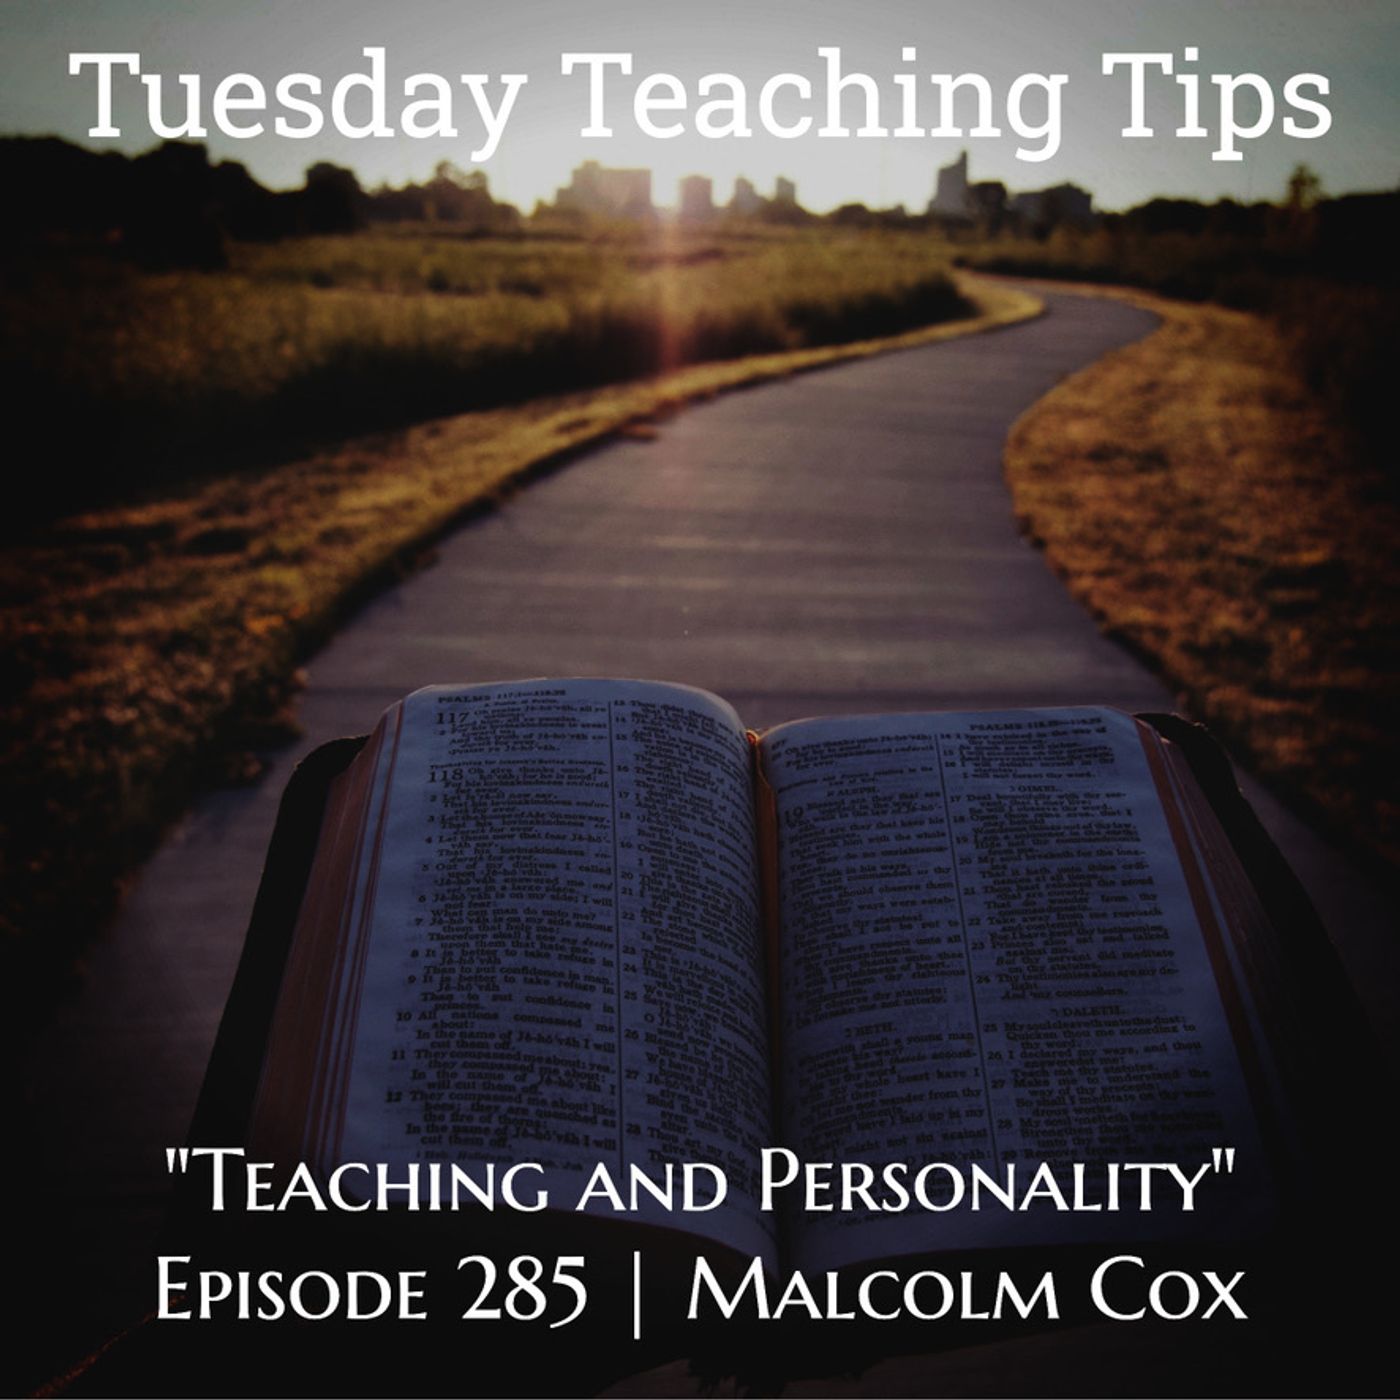 S2 Ep285: Tuesday Teaching Tips | Episode 285 | “Teaching and Personality - Toxic or Necessary?” | Malcolm Cox